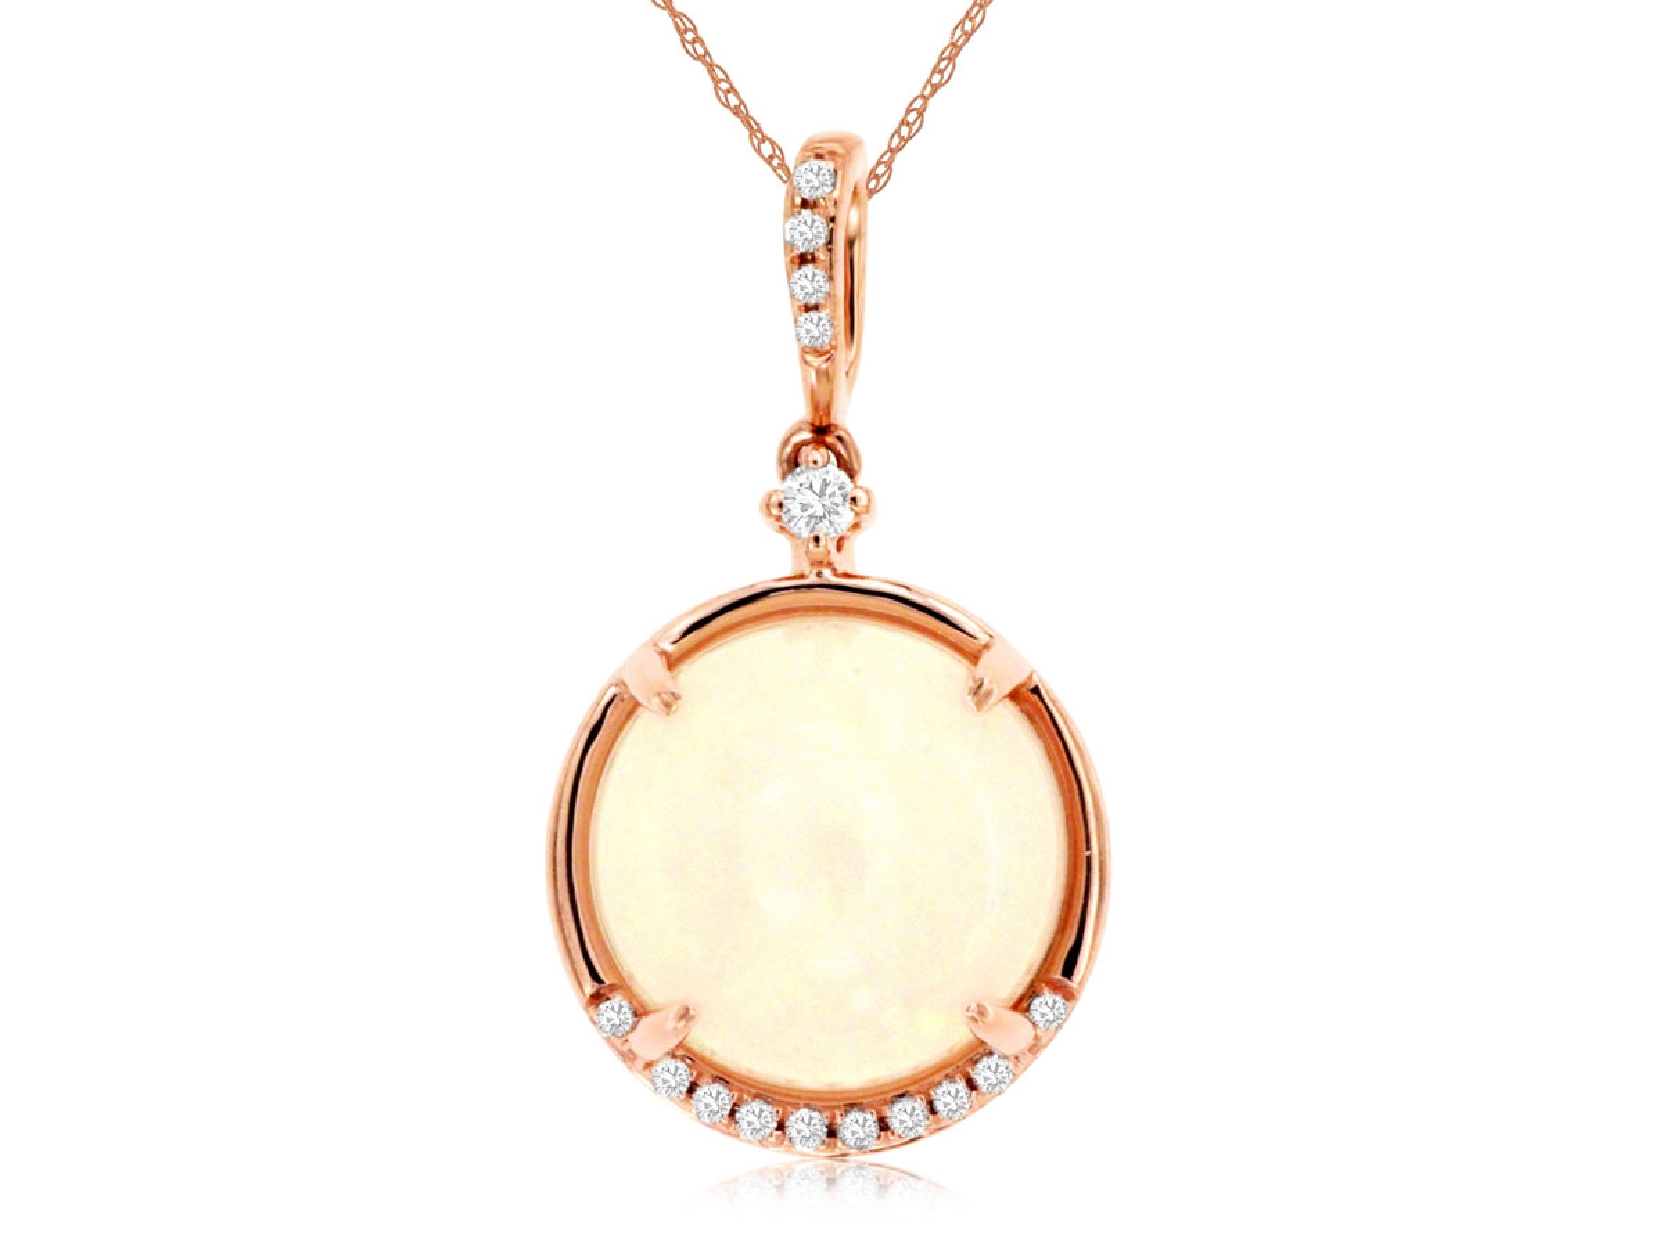 14K Rose Gold Round Ethiopian Opal Necklace with Diamond Bail; 18 inches
3.2CT Opal
0.06CTTW Diamonds